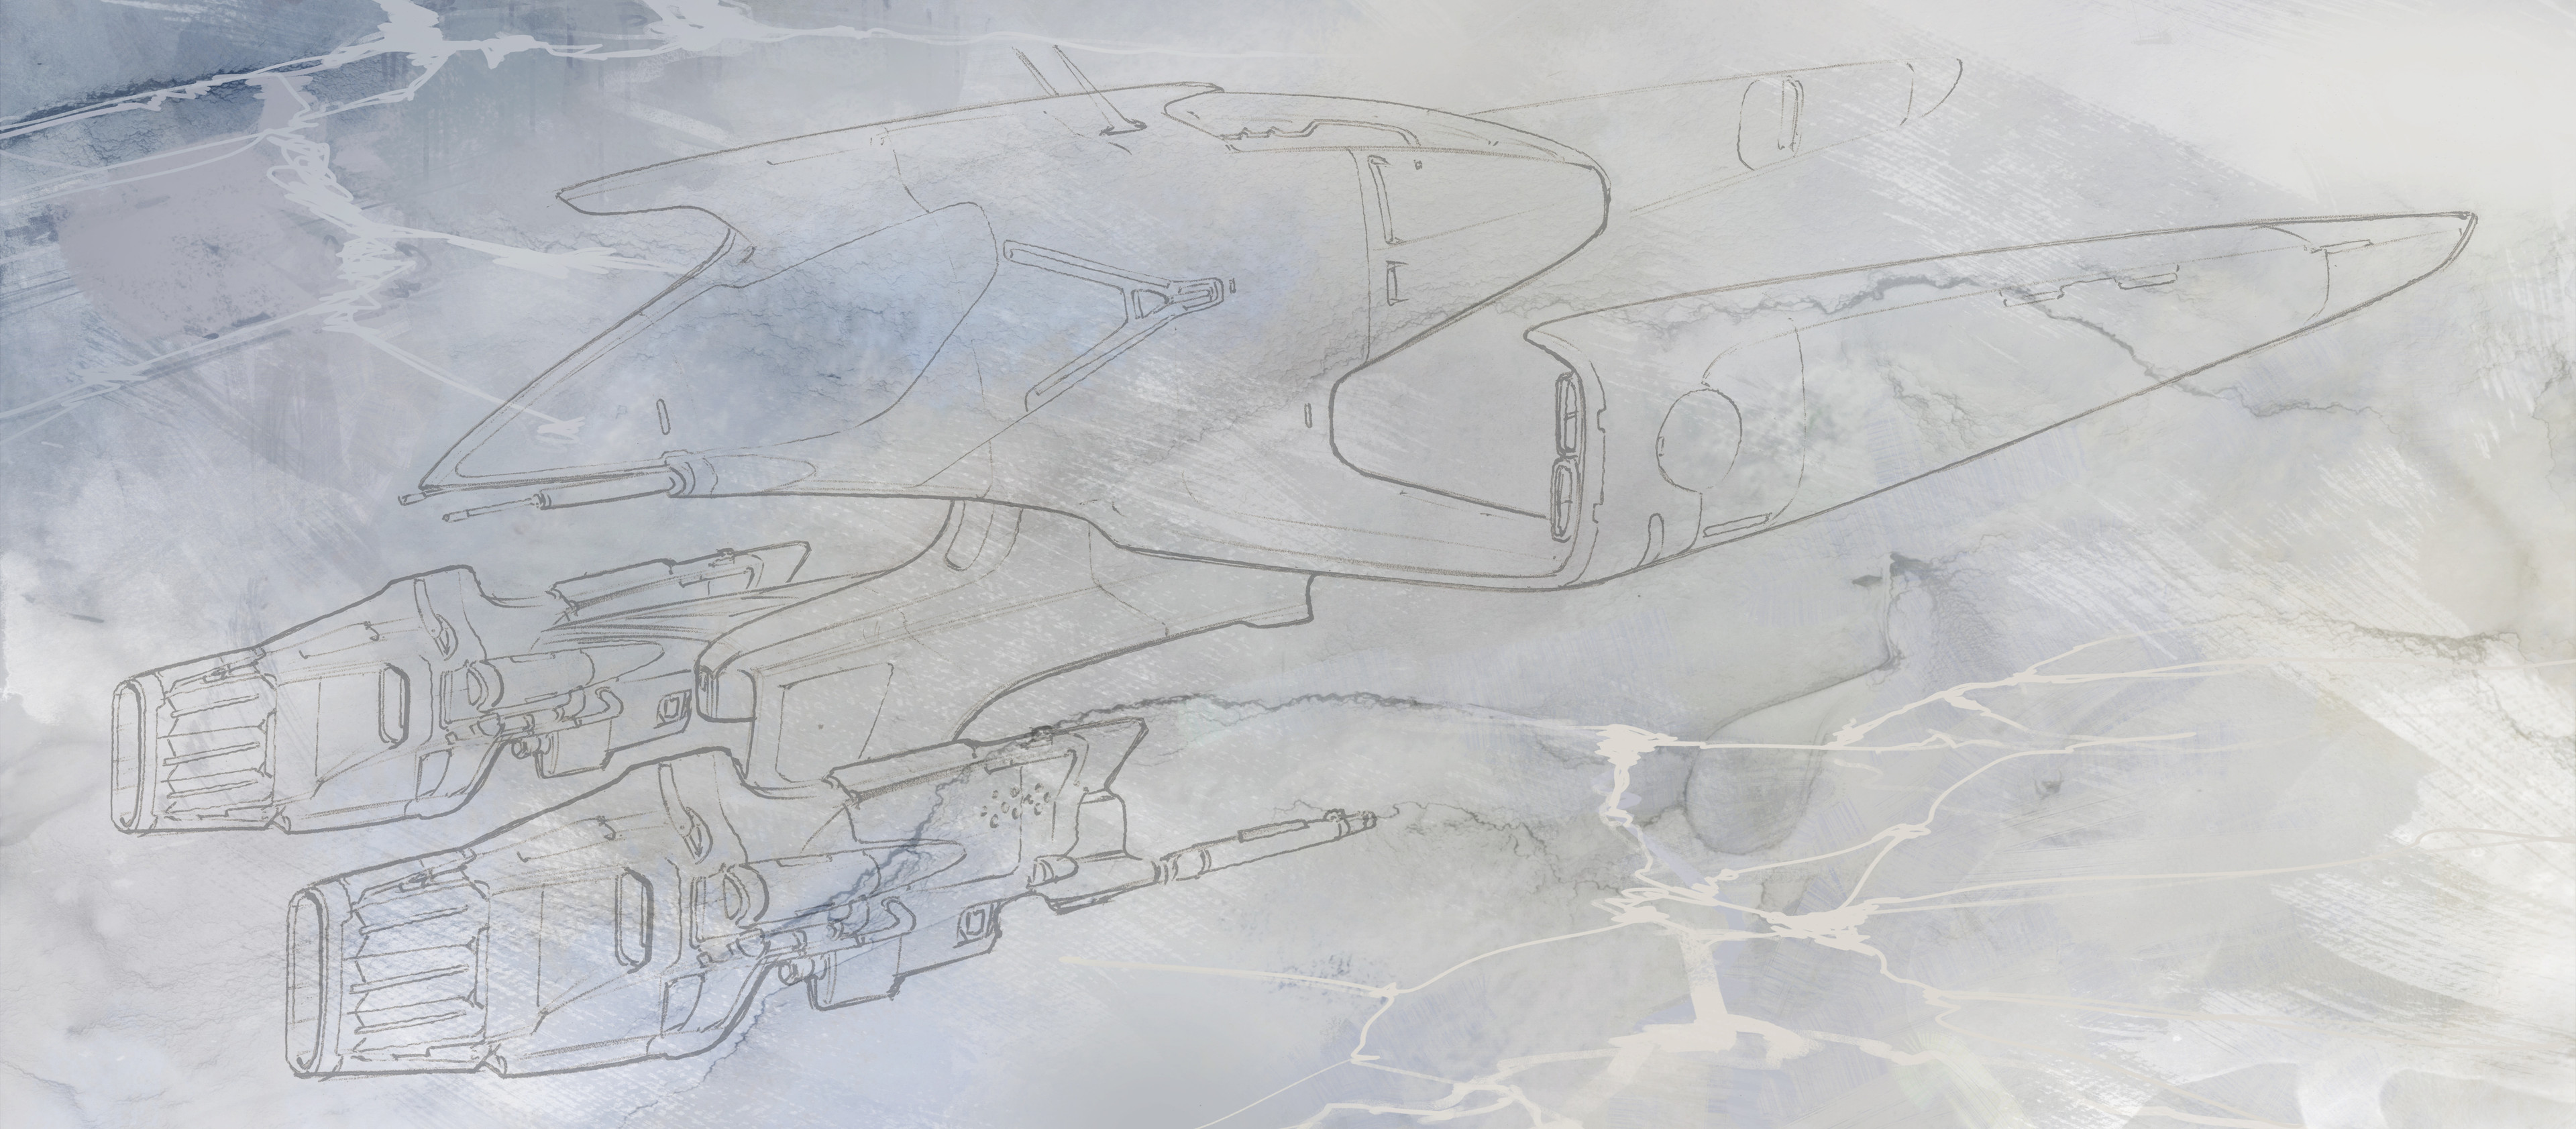 Coming across the sketch, I decided it would be good to take a stab at it in bare metal, one of my favorite material finishes. The background was laid in first to contrast- a frigid possibly alien arctic landscape. Layered analog textures.